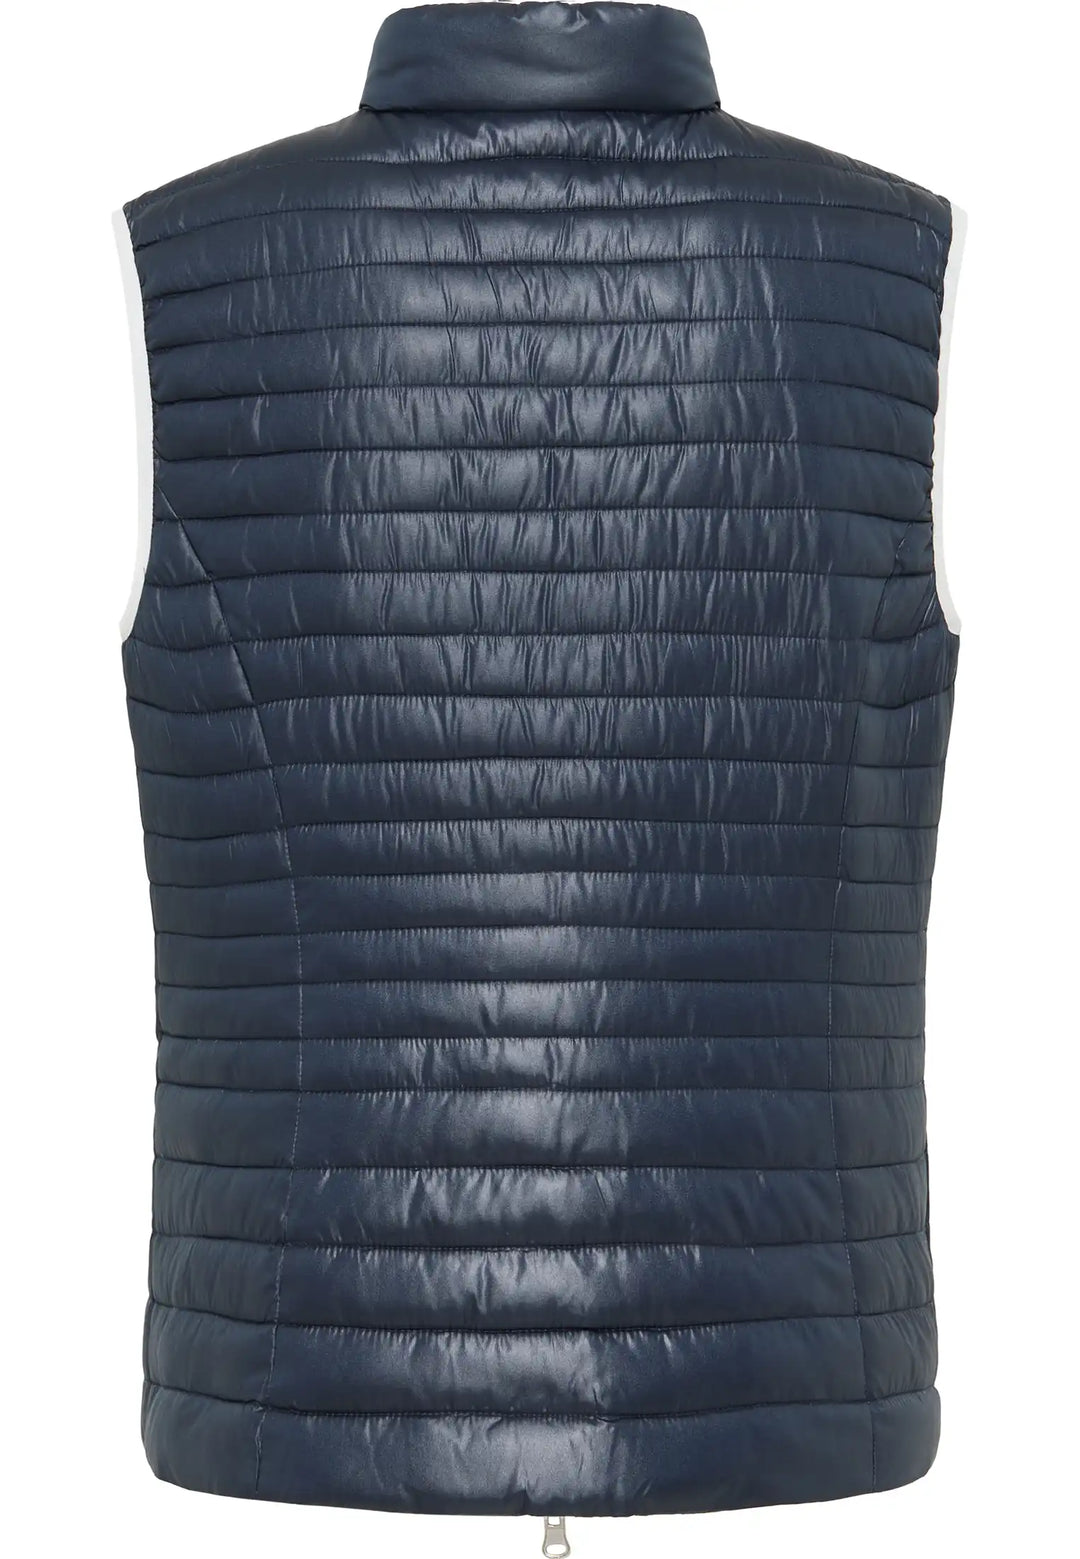 Rear view of a chic reversible gilet in navy with a high collar and patterned interior for a stylish, adaptable wardrobe piece, style 55500042-860